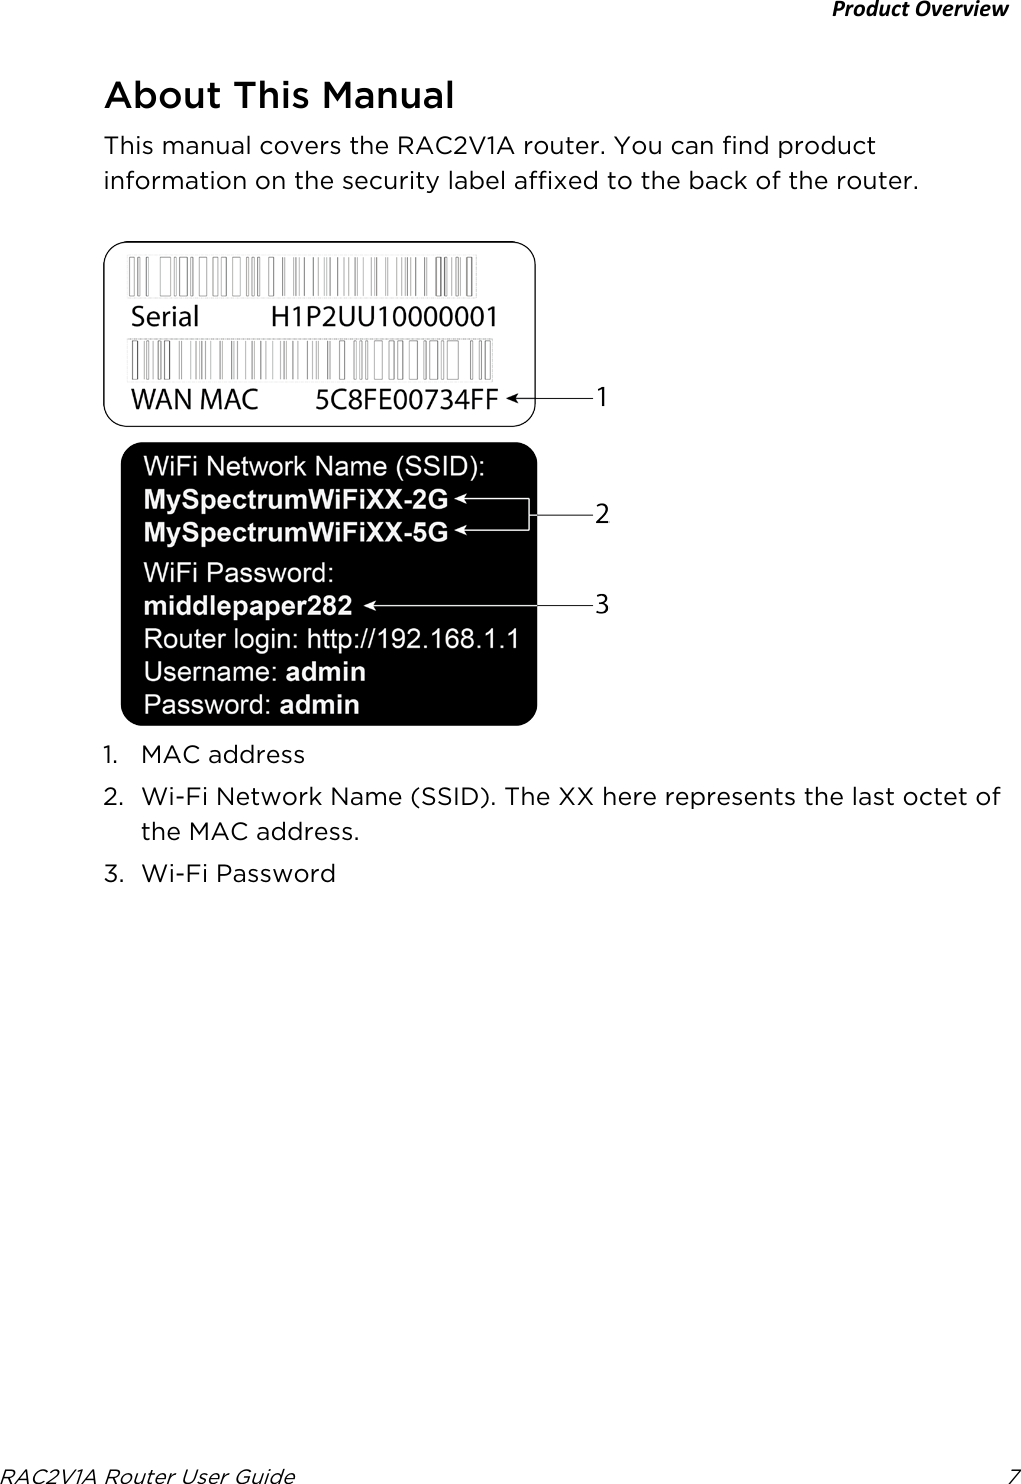 Product Overview  RAC2V1A Router User Guide  7  About This Manual This manual covers the RAC2V1A router. You can find product information on the security label affixed to the back of the router.   1. MAC address 2. Wi-Fi Network Name (SSID). The XX here represents the last octet of the MAC address. 3. Wi-Fi Password 